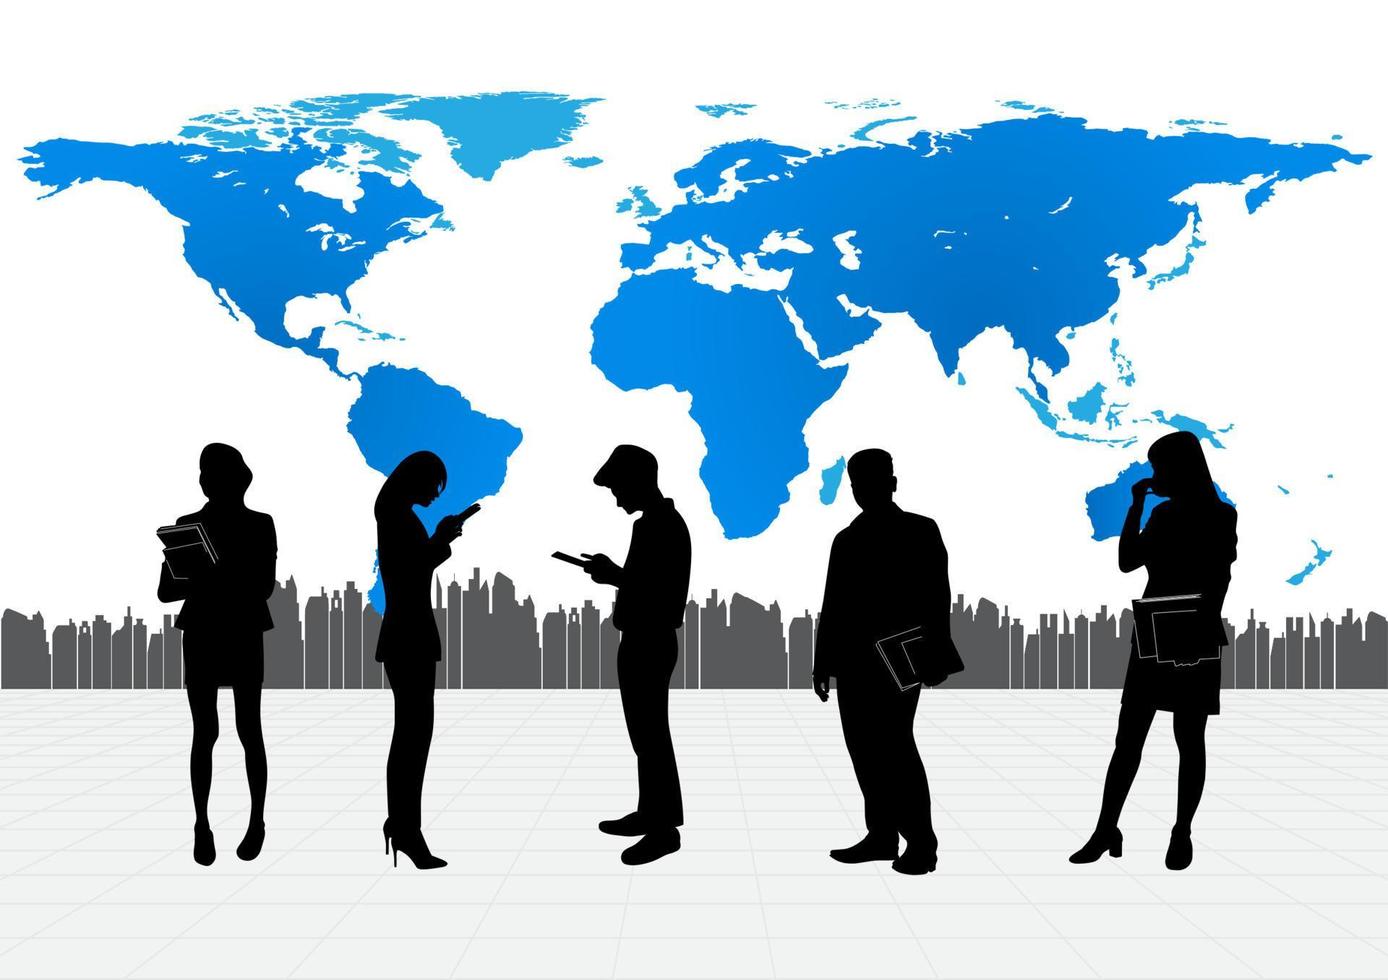 group Business people with map world background vector illustration